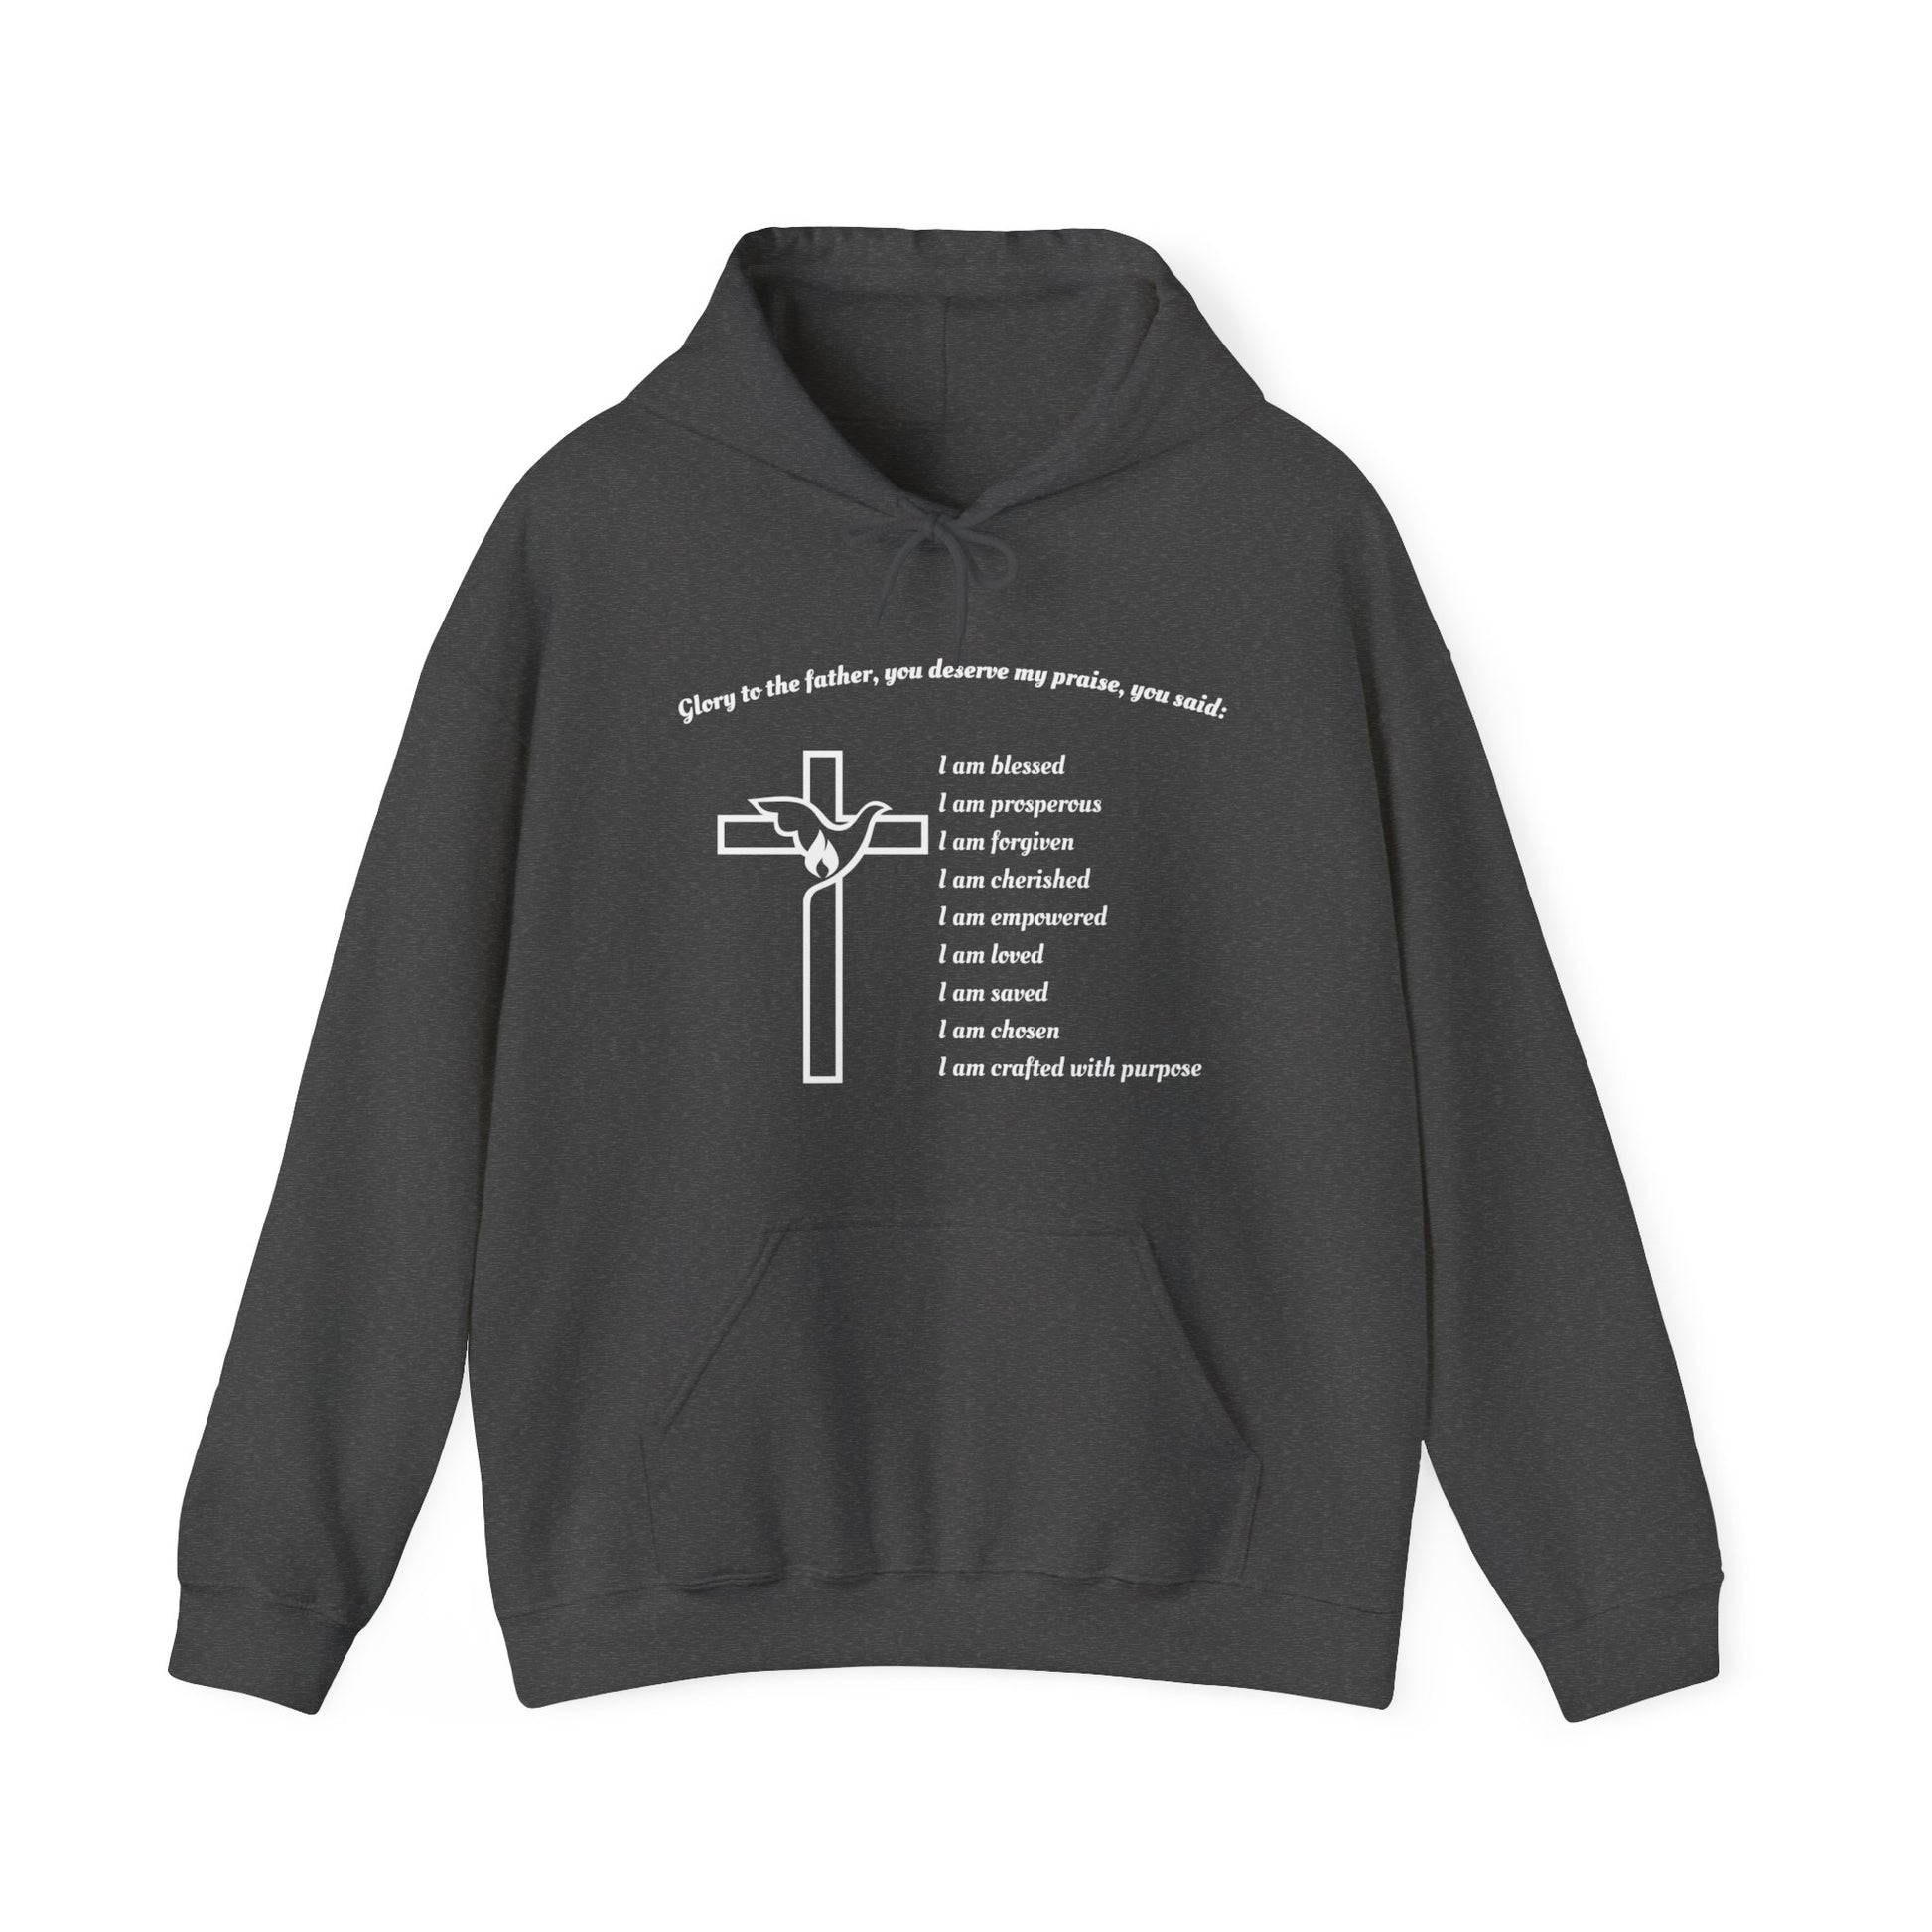 I am Glory to the Father Hooded Sweatshirt Unisex Cozy Heavy Blend48